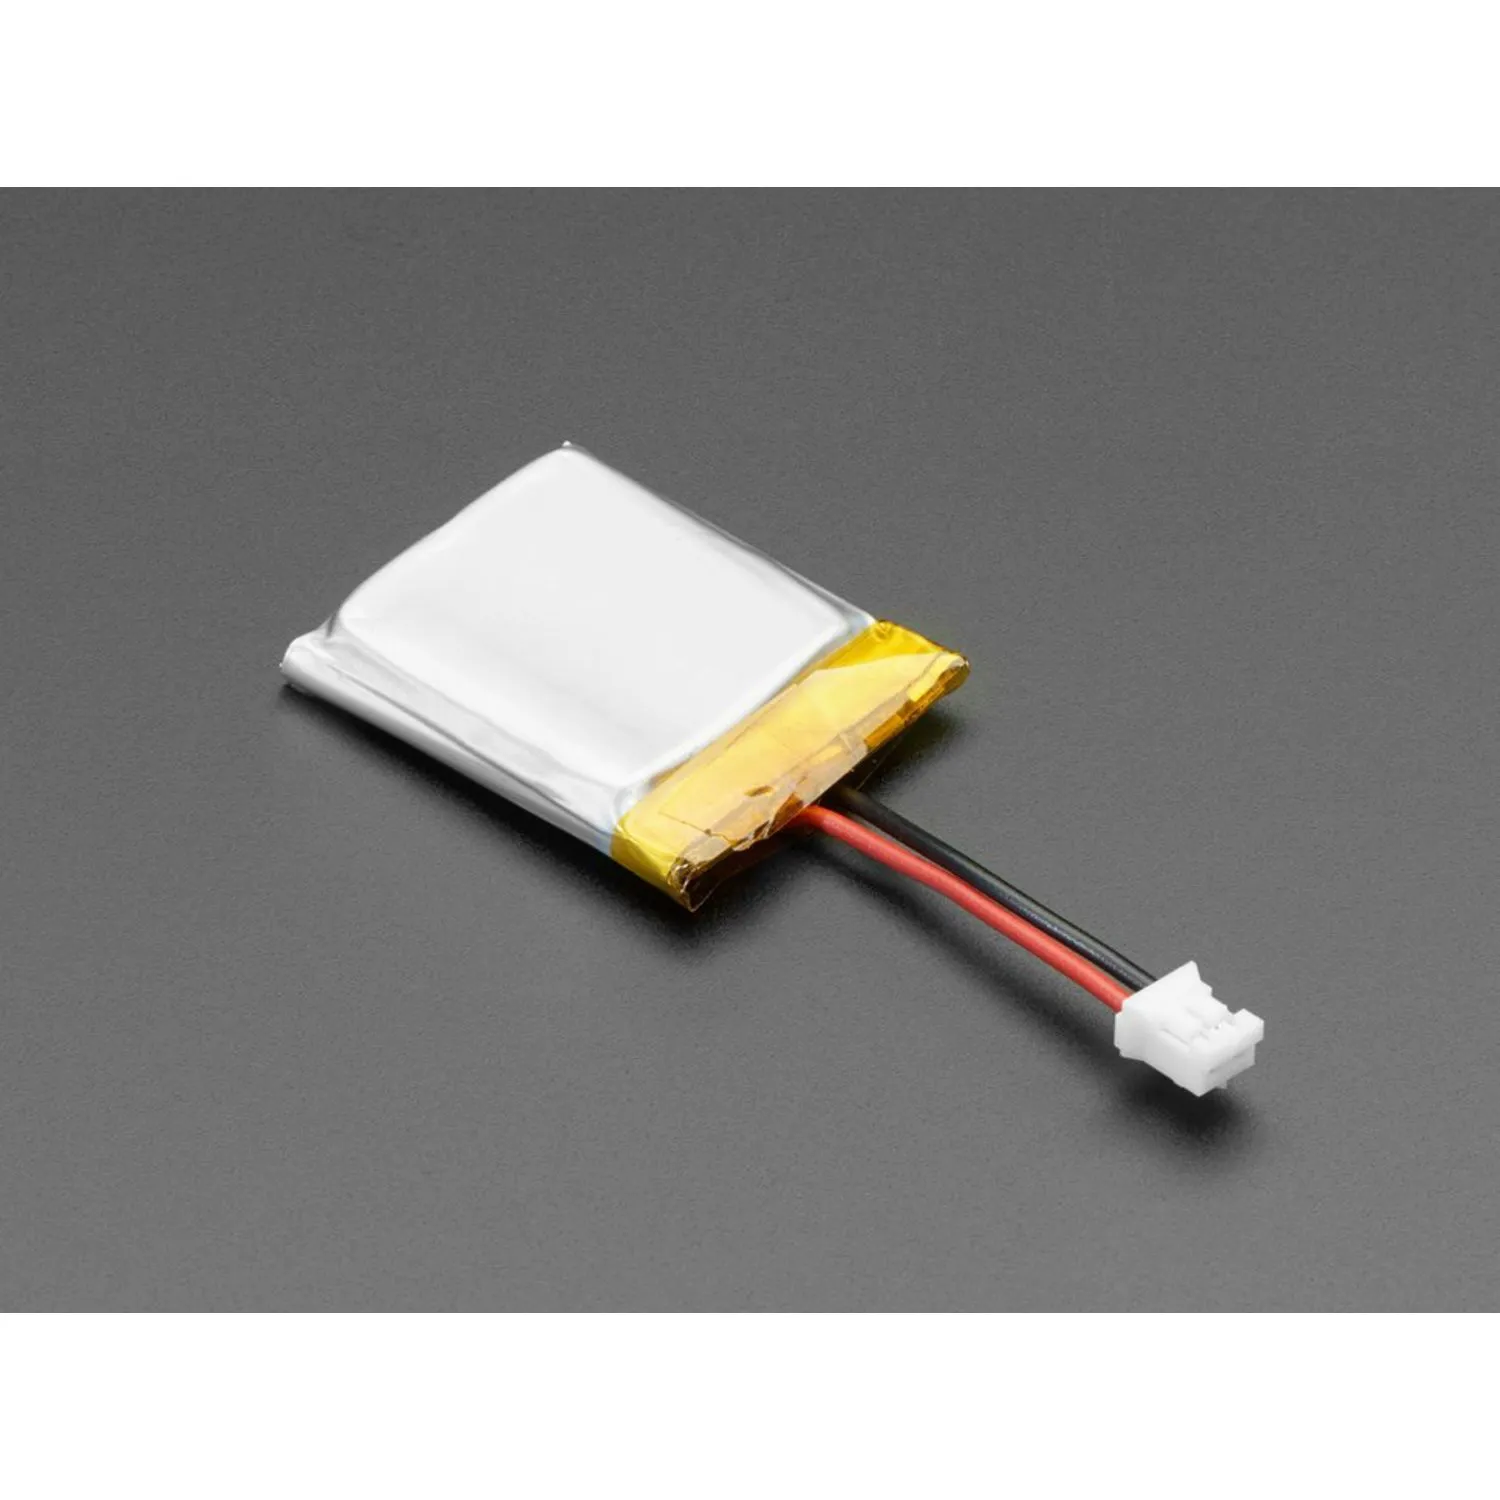 Photo of Lithium Ion Polymer Battery with Short Cable - 3.7V 350mAh